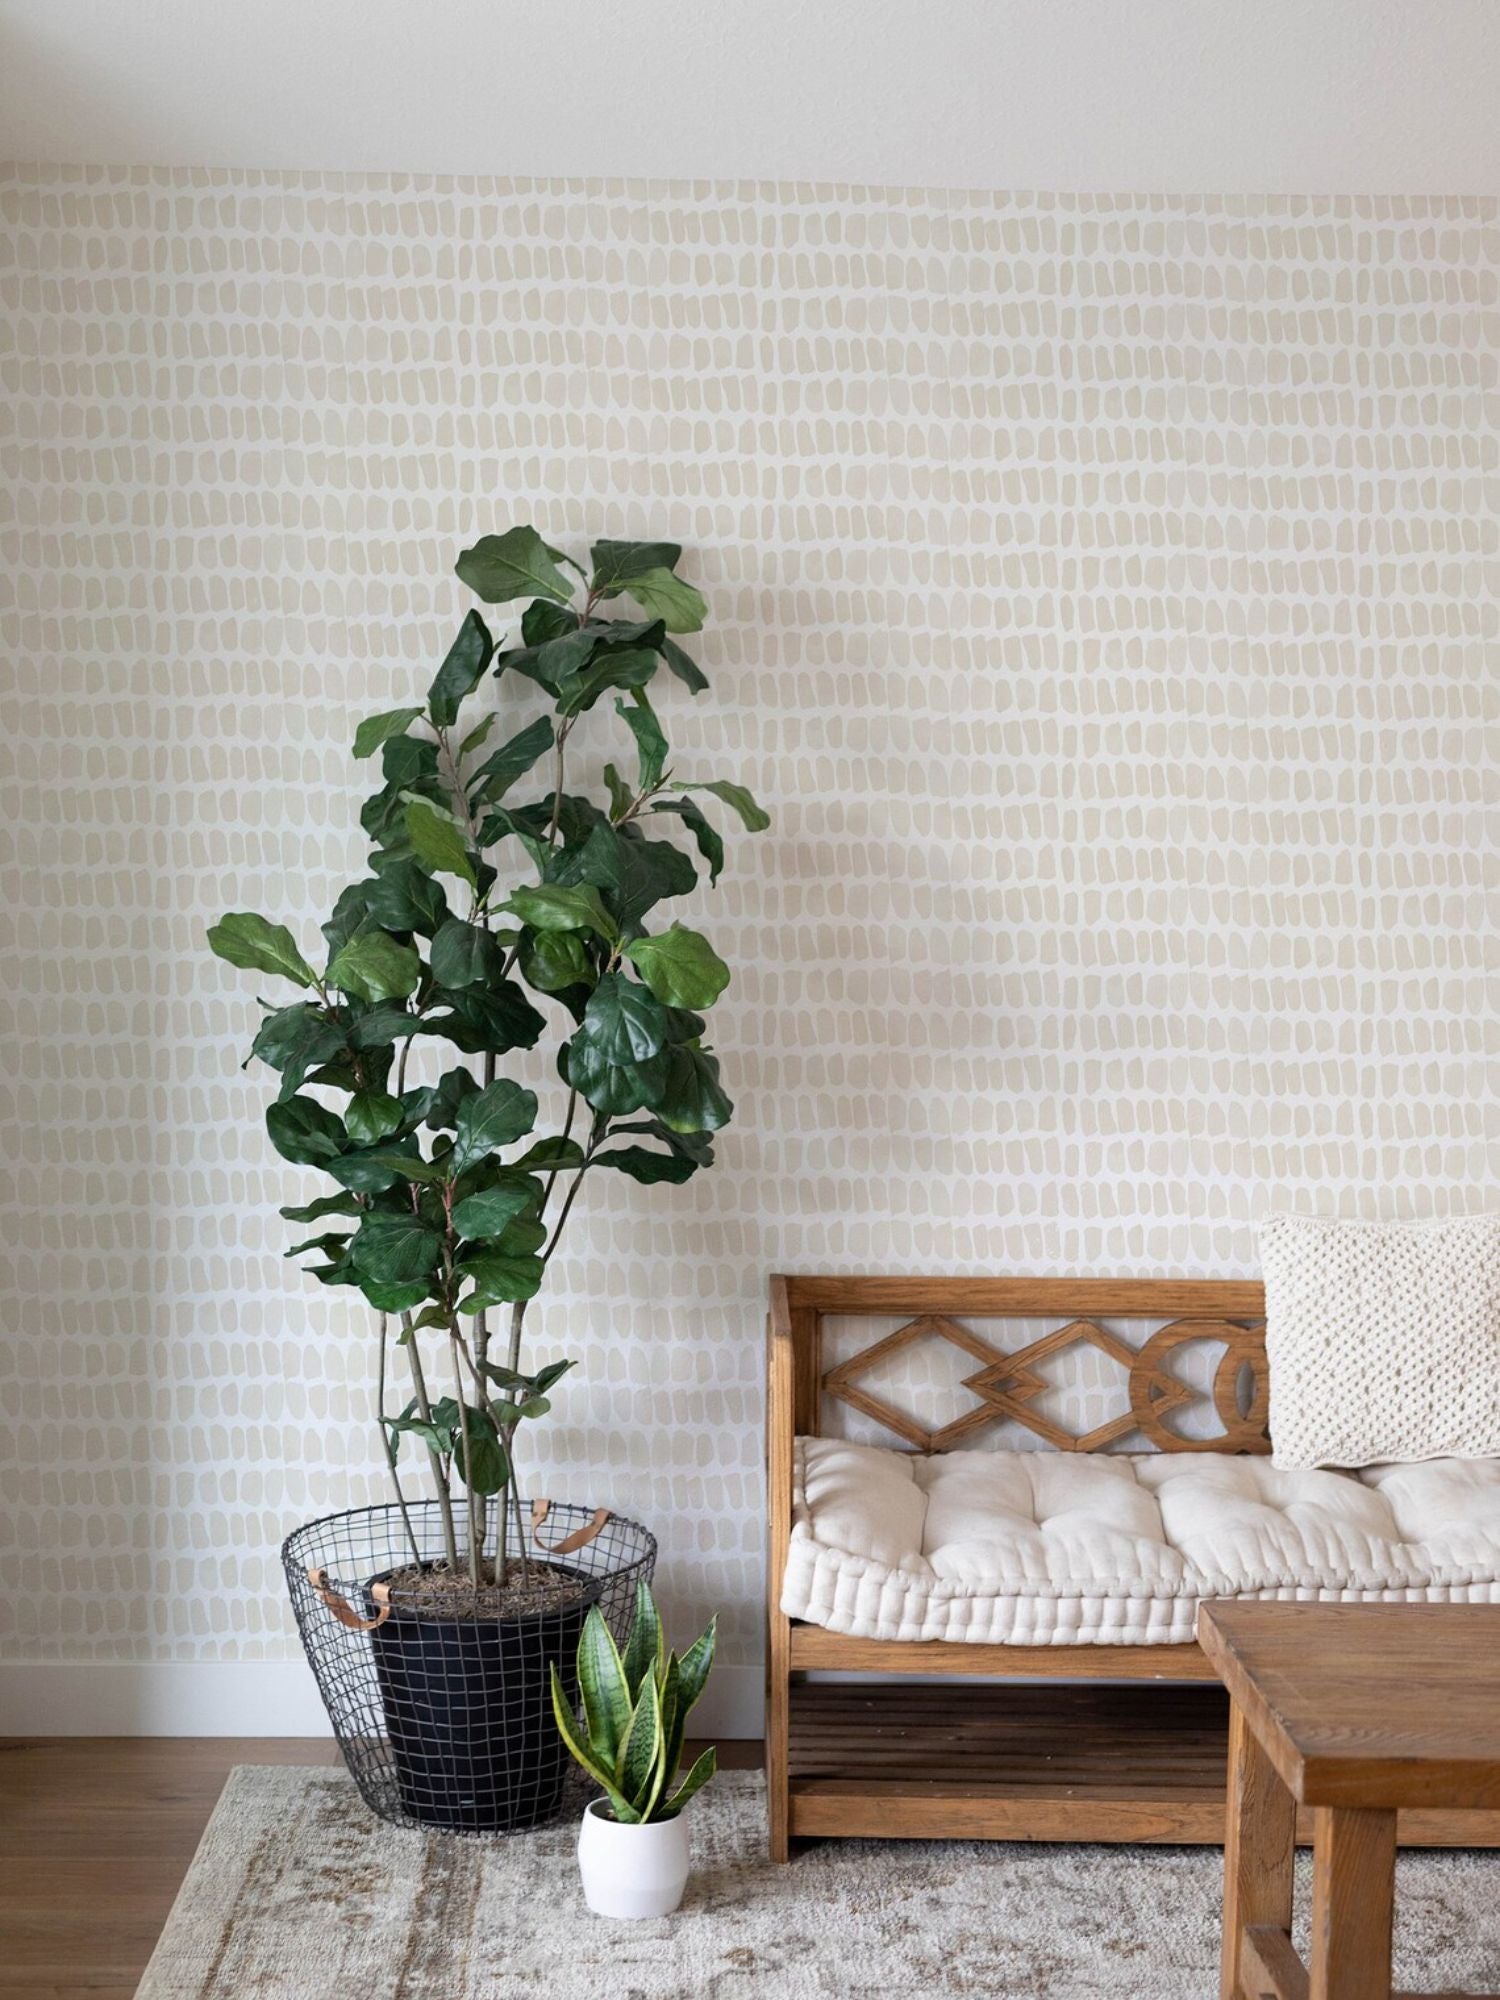 An interior setting where the Ecru Watercolour Dots Wallpaper is used to decorate a cozy corner. The wallpaper's subtle design complements the natural wooden furniture and the greenery of indoor plants, creating a relaxed and organic ambiance in the room. The image shows how the wallpaper can enhance a living space without overwhelming it.